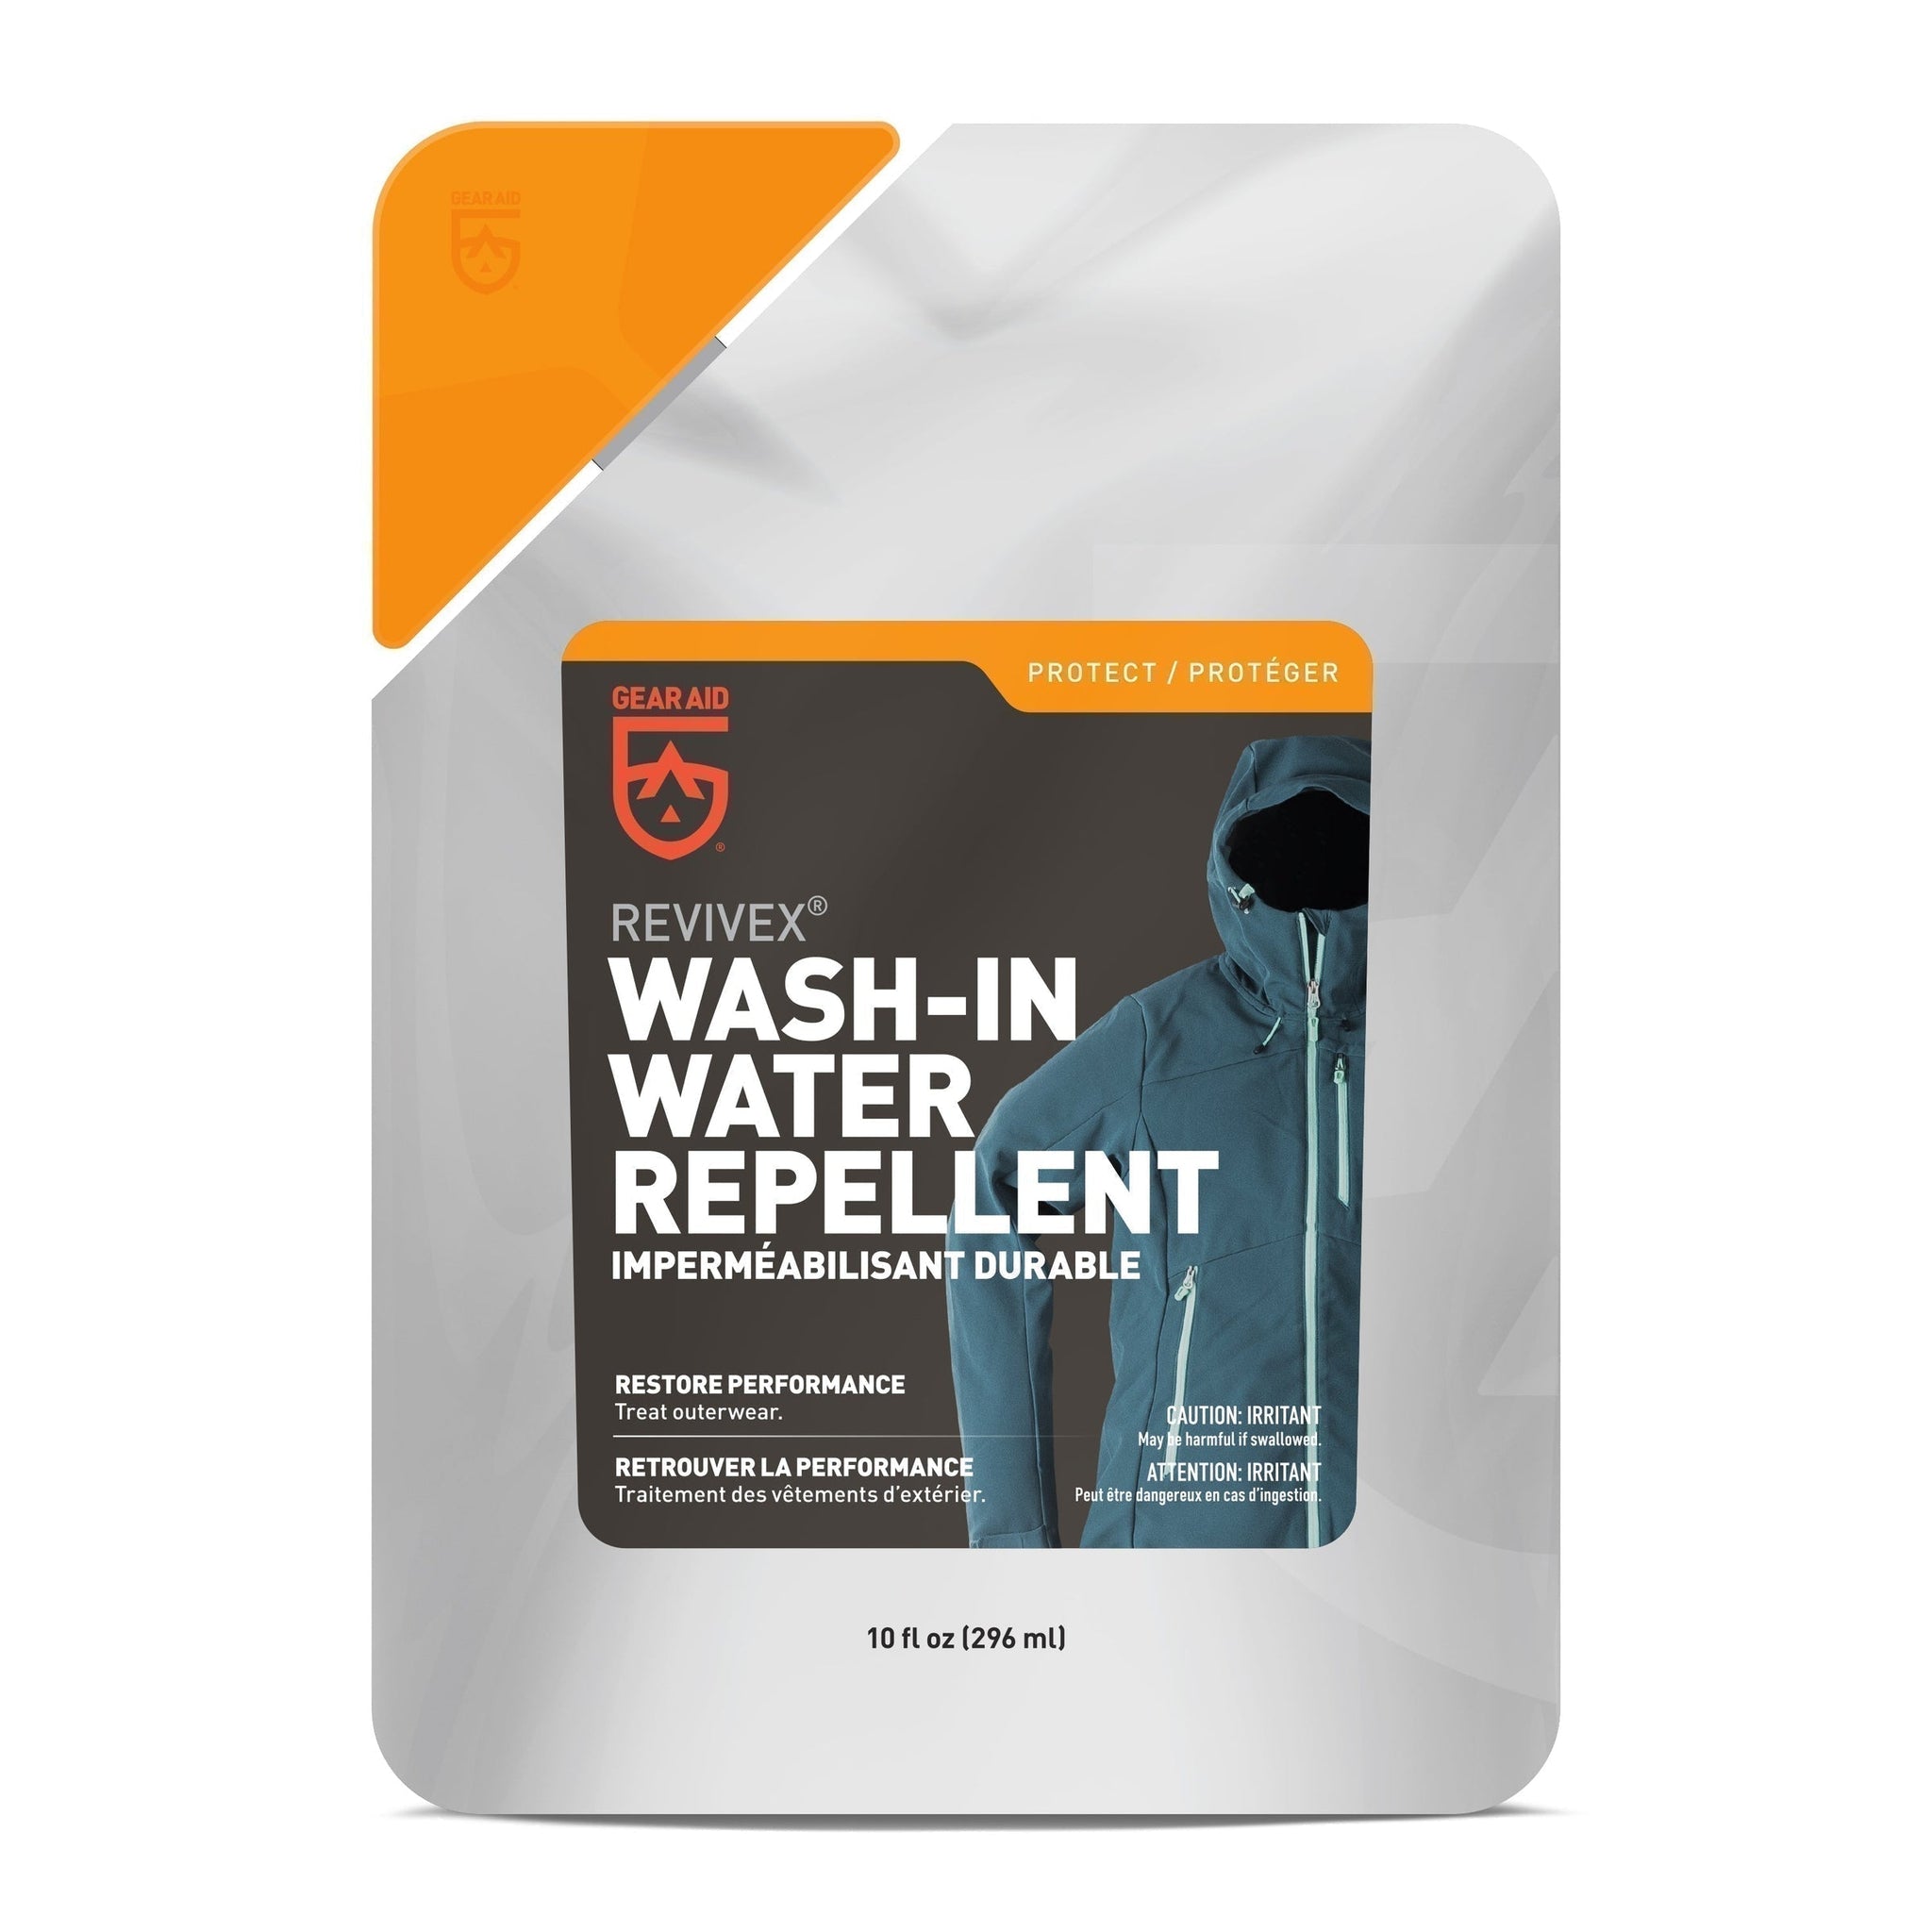 Gear Aid-Revivex Wash-In Water Repellent-sewing notion-gather here online